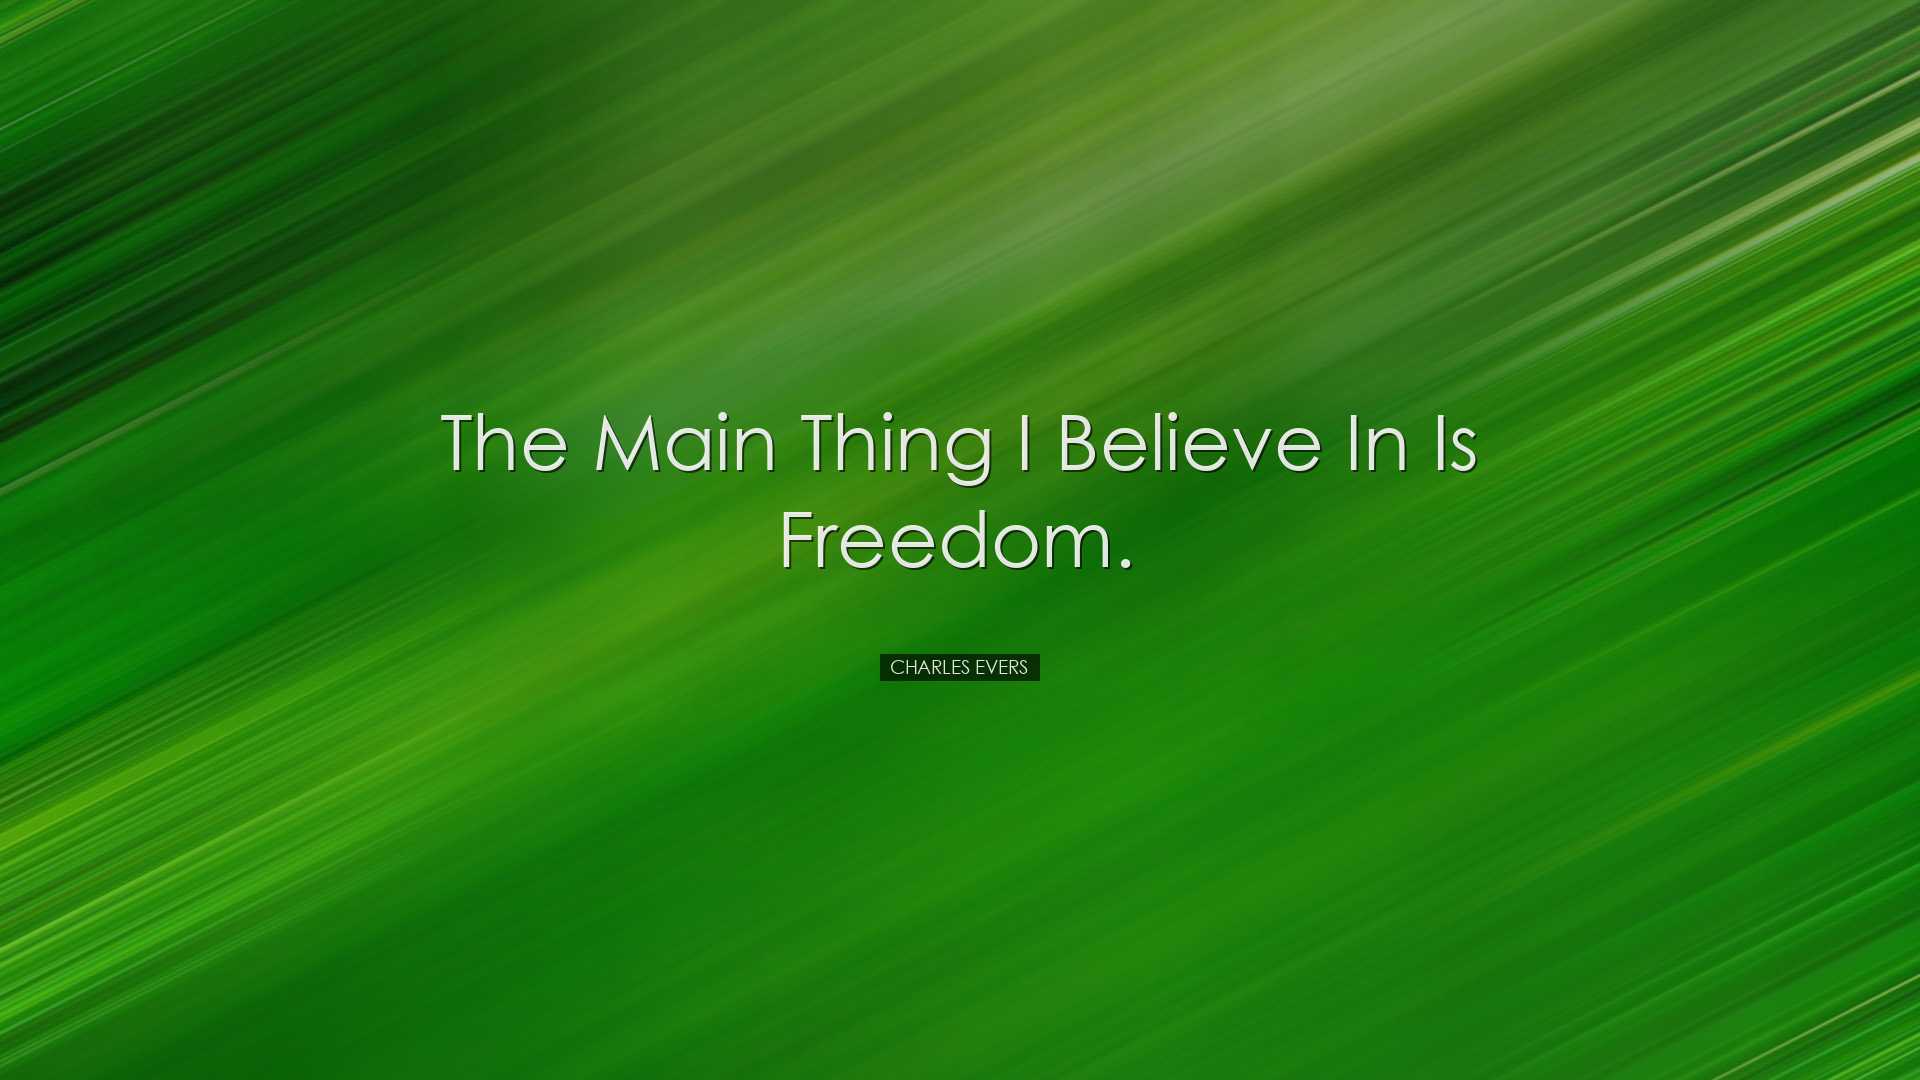 The main thing I believe in is freedom. - Charles Evers